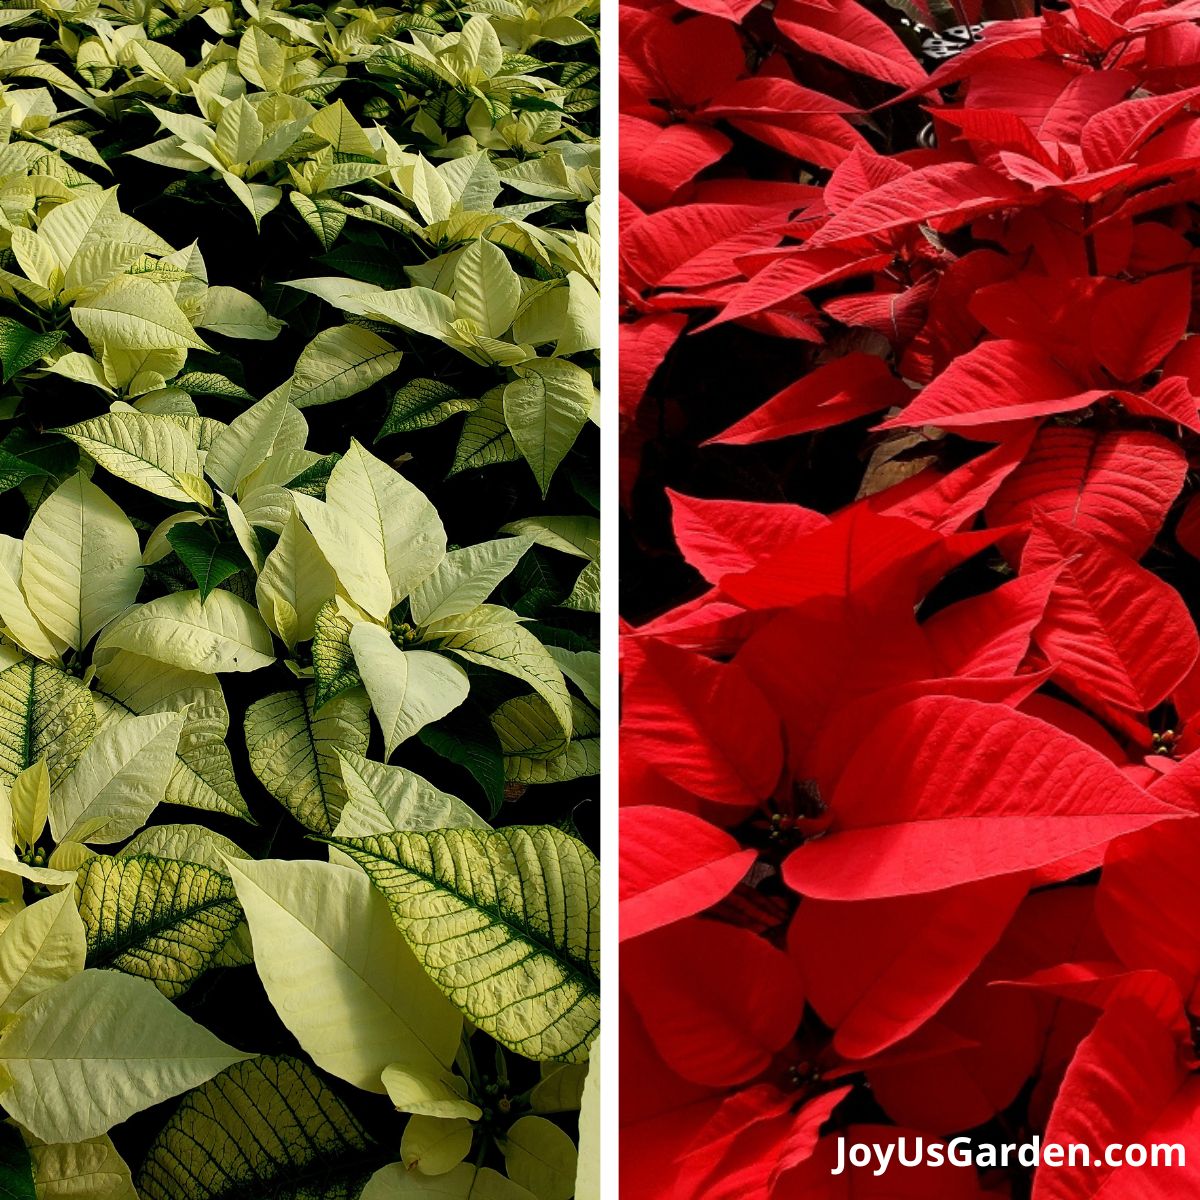 a collage of 2 photos side by side white poinsettias on the left & red poinsettias on the right